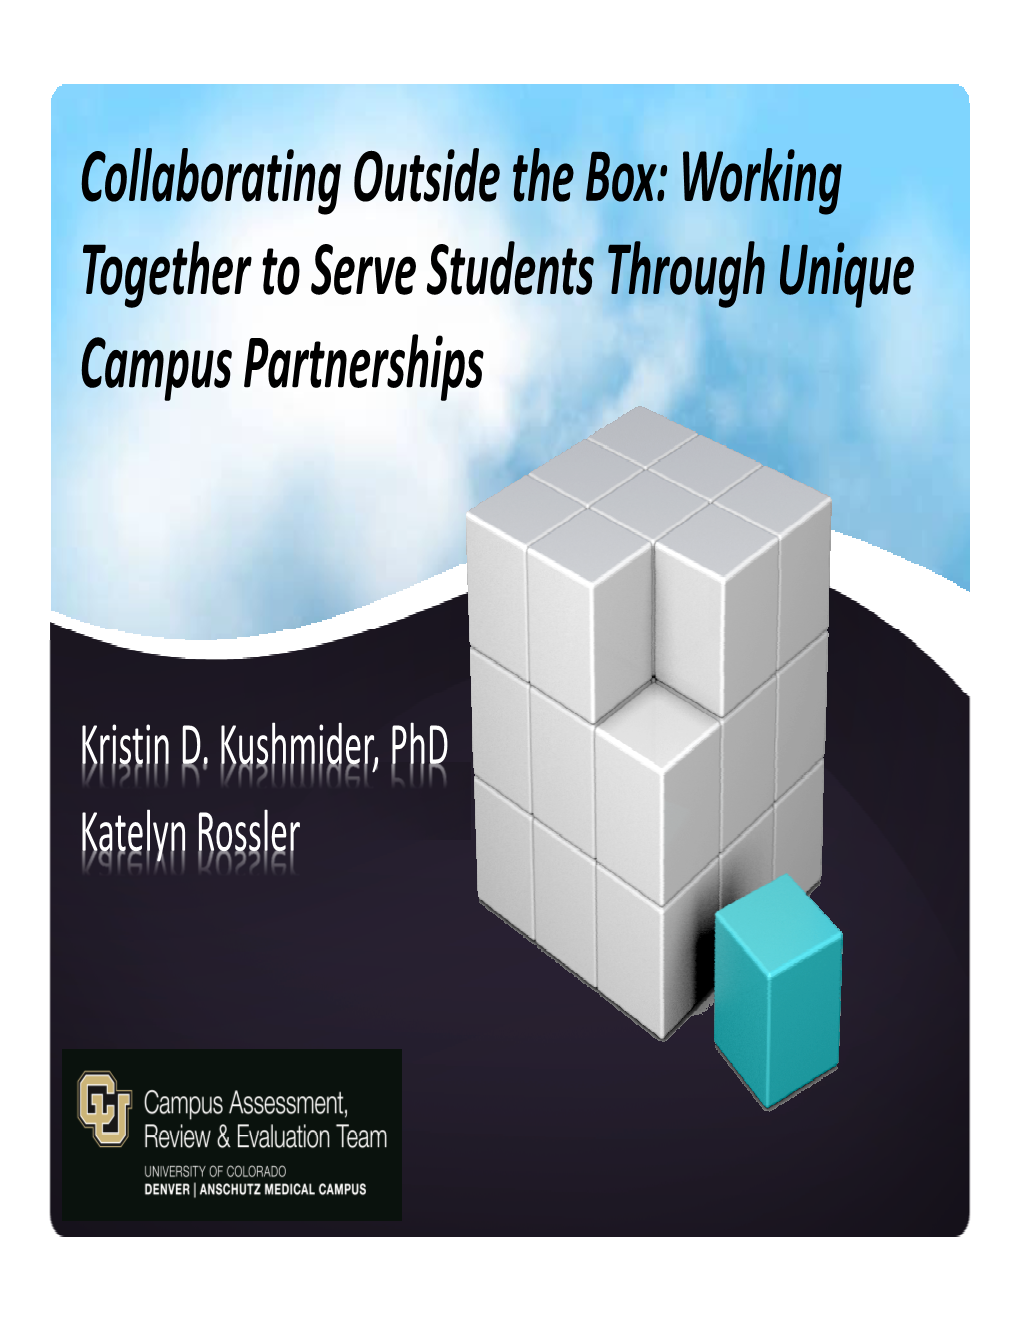 Collaborating Outside the Box: Working Together to Serve Students Through Unique Campus Partnerships